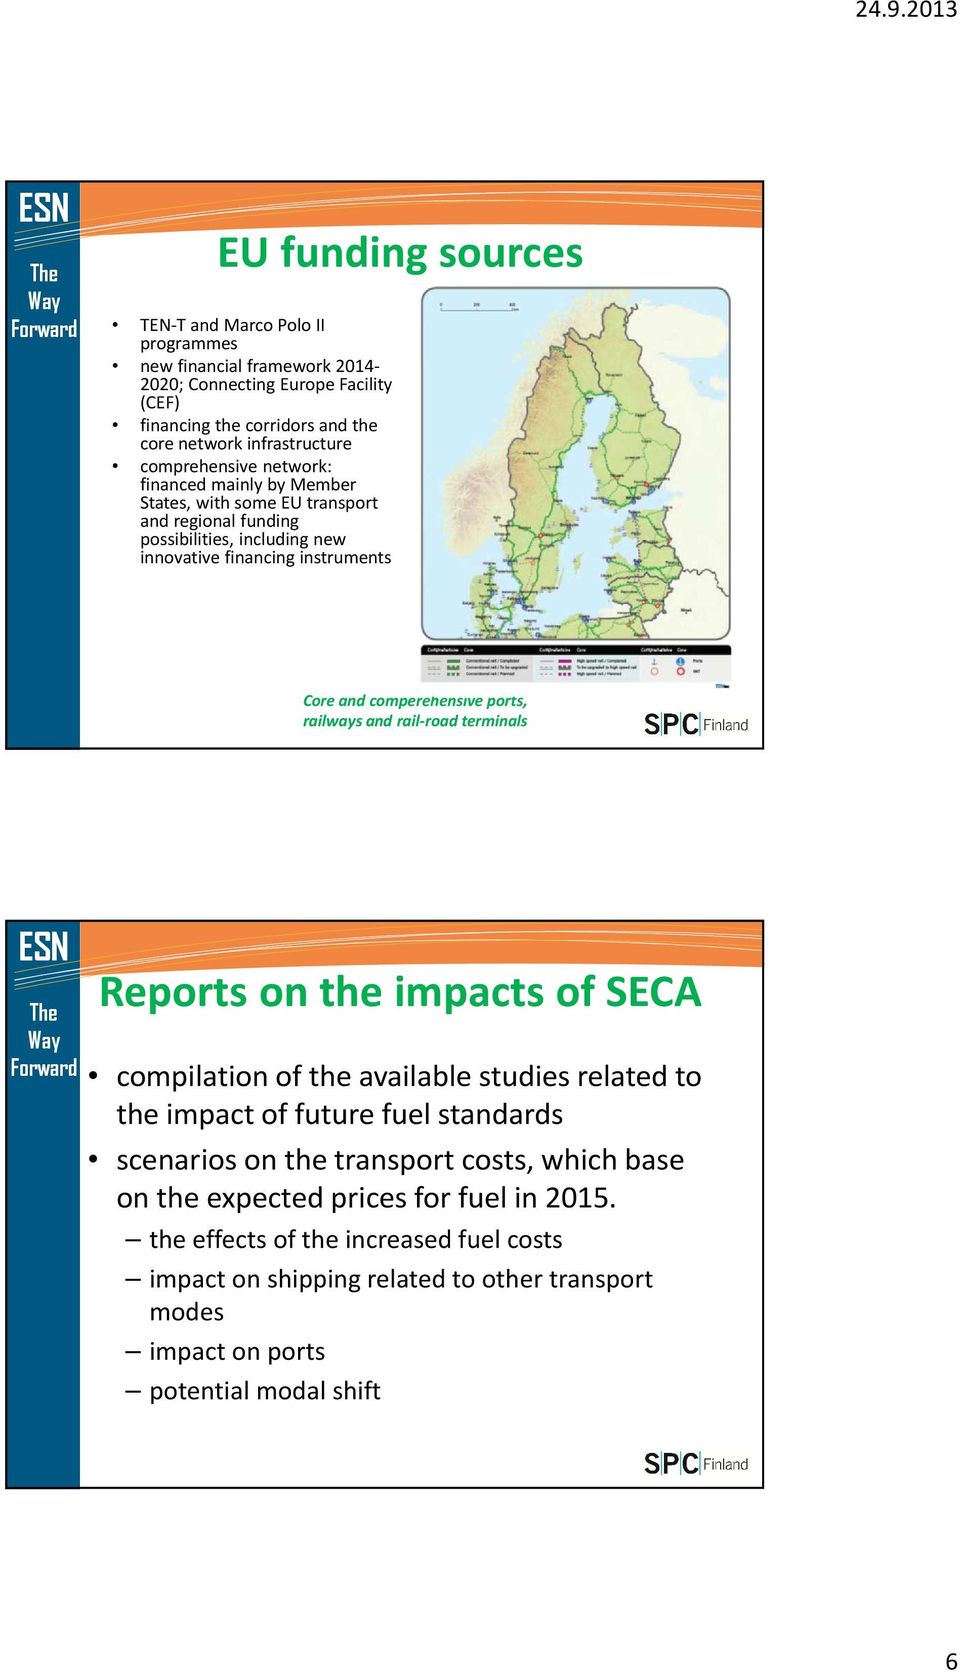 comperehensiveports, railways and rail-road terminals Reports on the impacts of SECA compilation of the available studies related to the impact of future fuel standards scenarios on